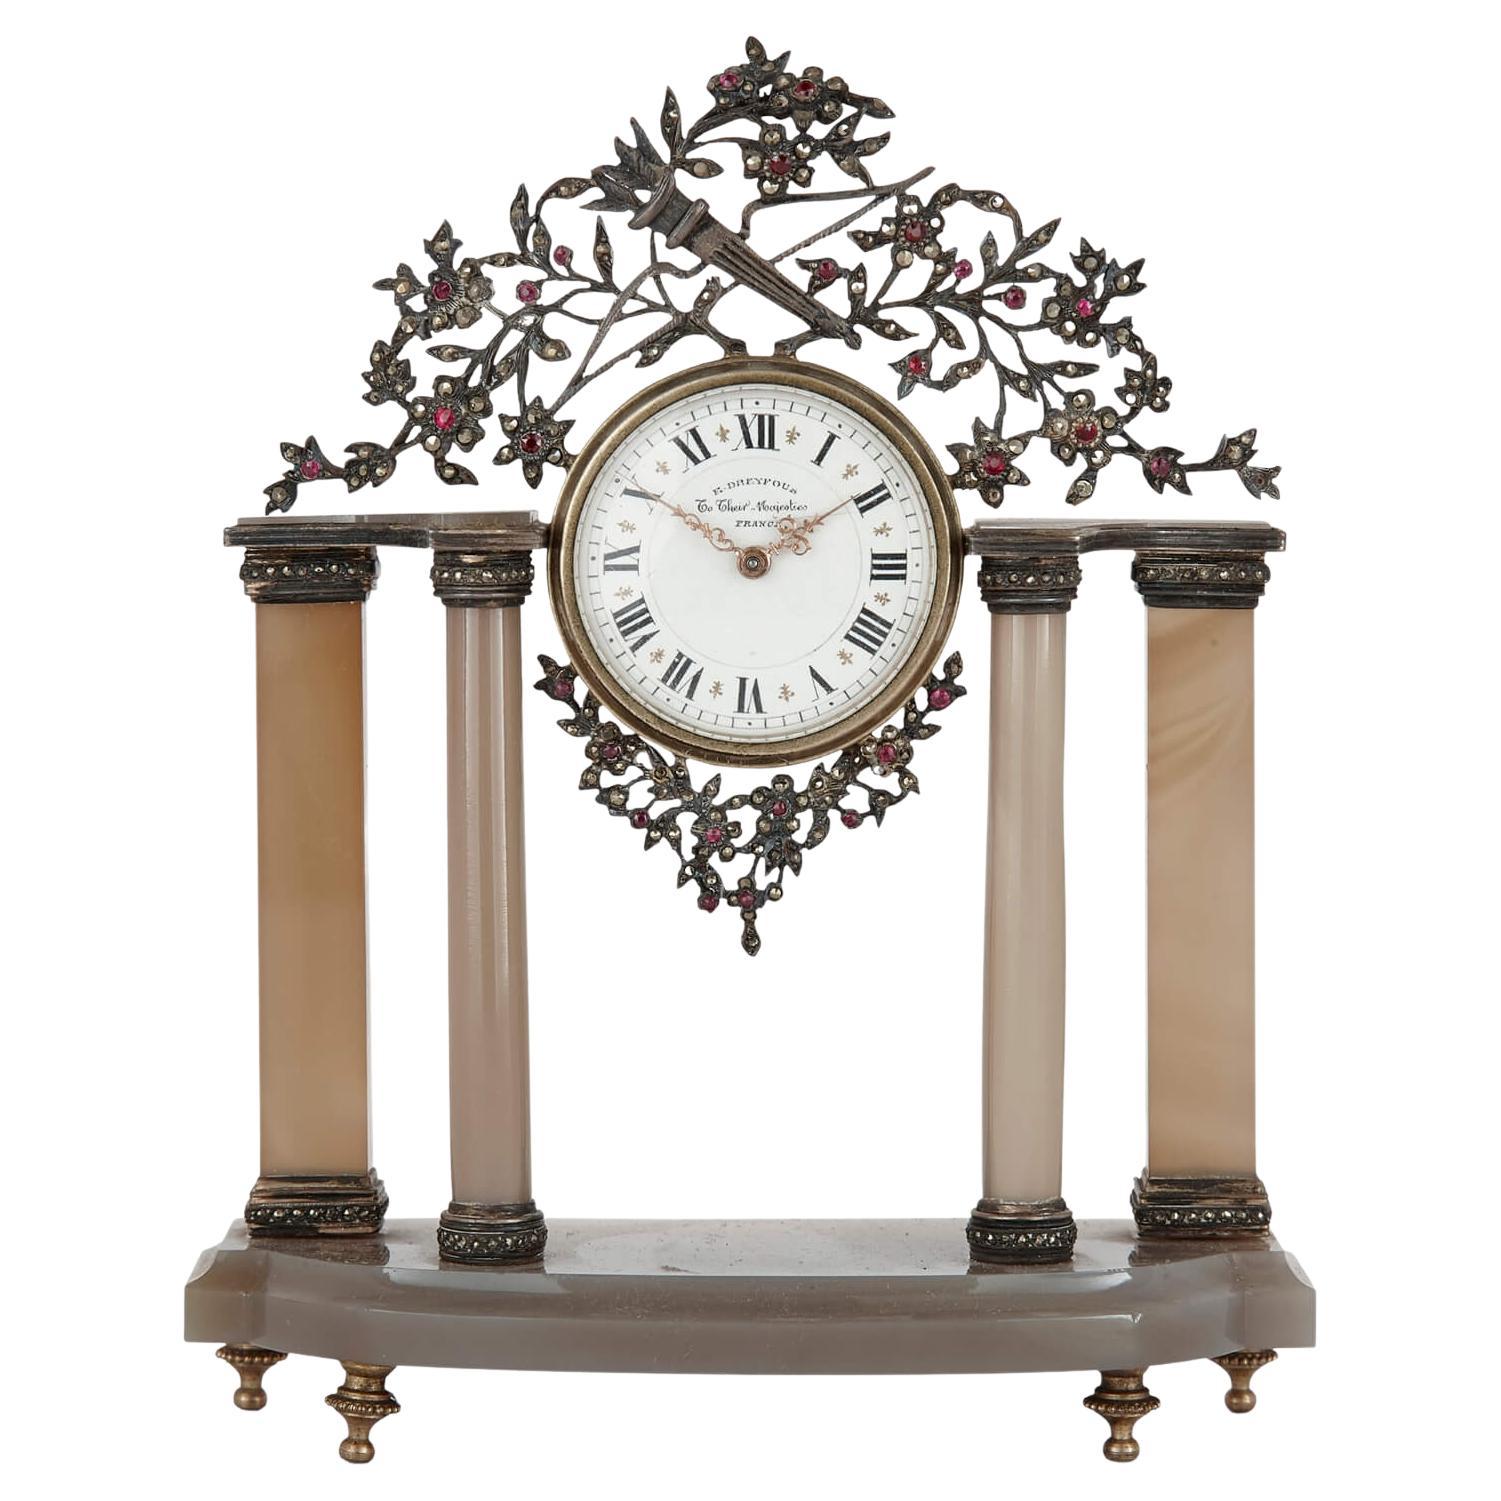 Early 20th Century Silver and Precious Stone Table Clock by Dreyfous